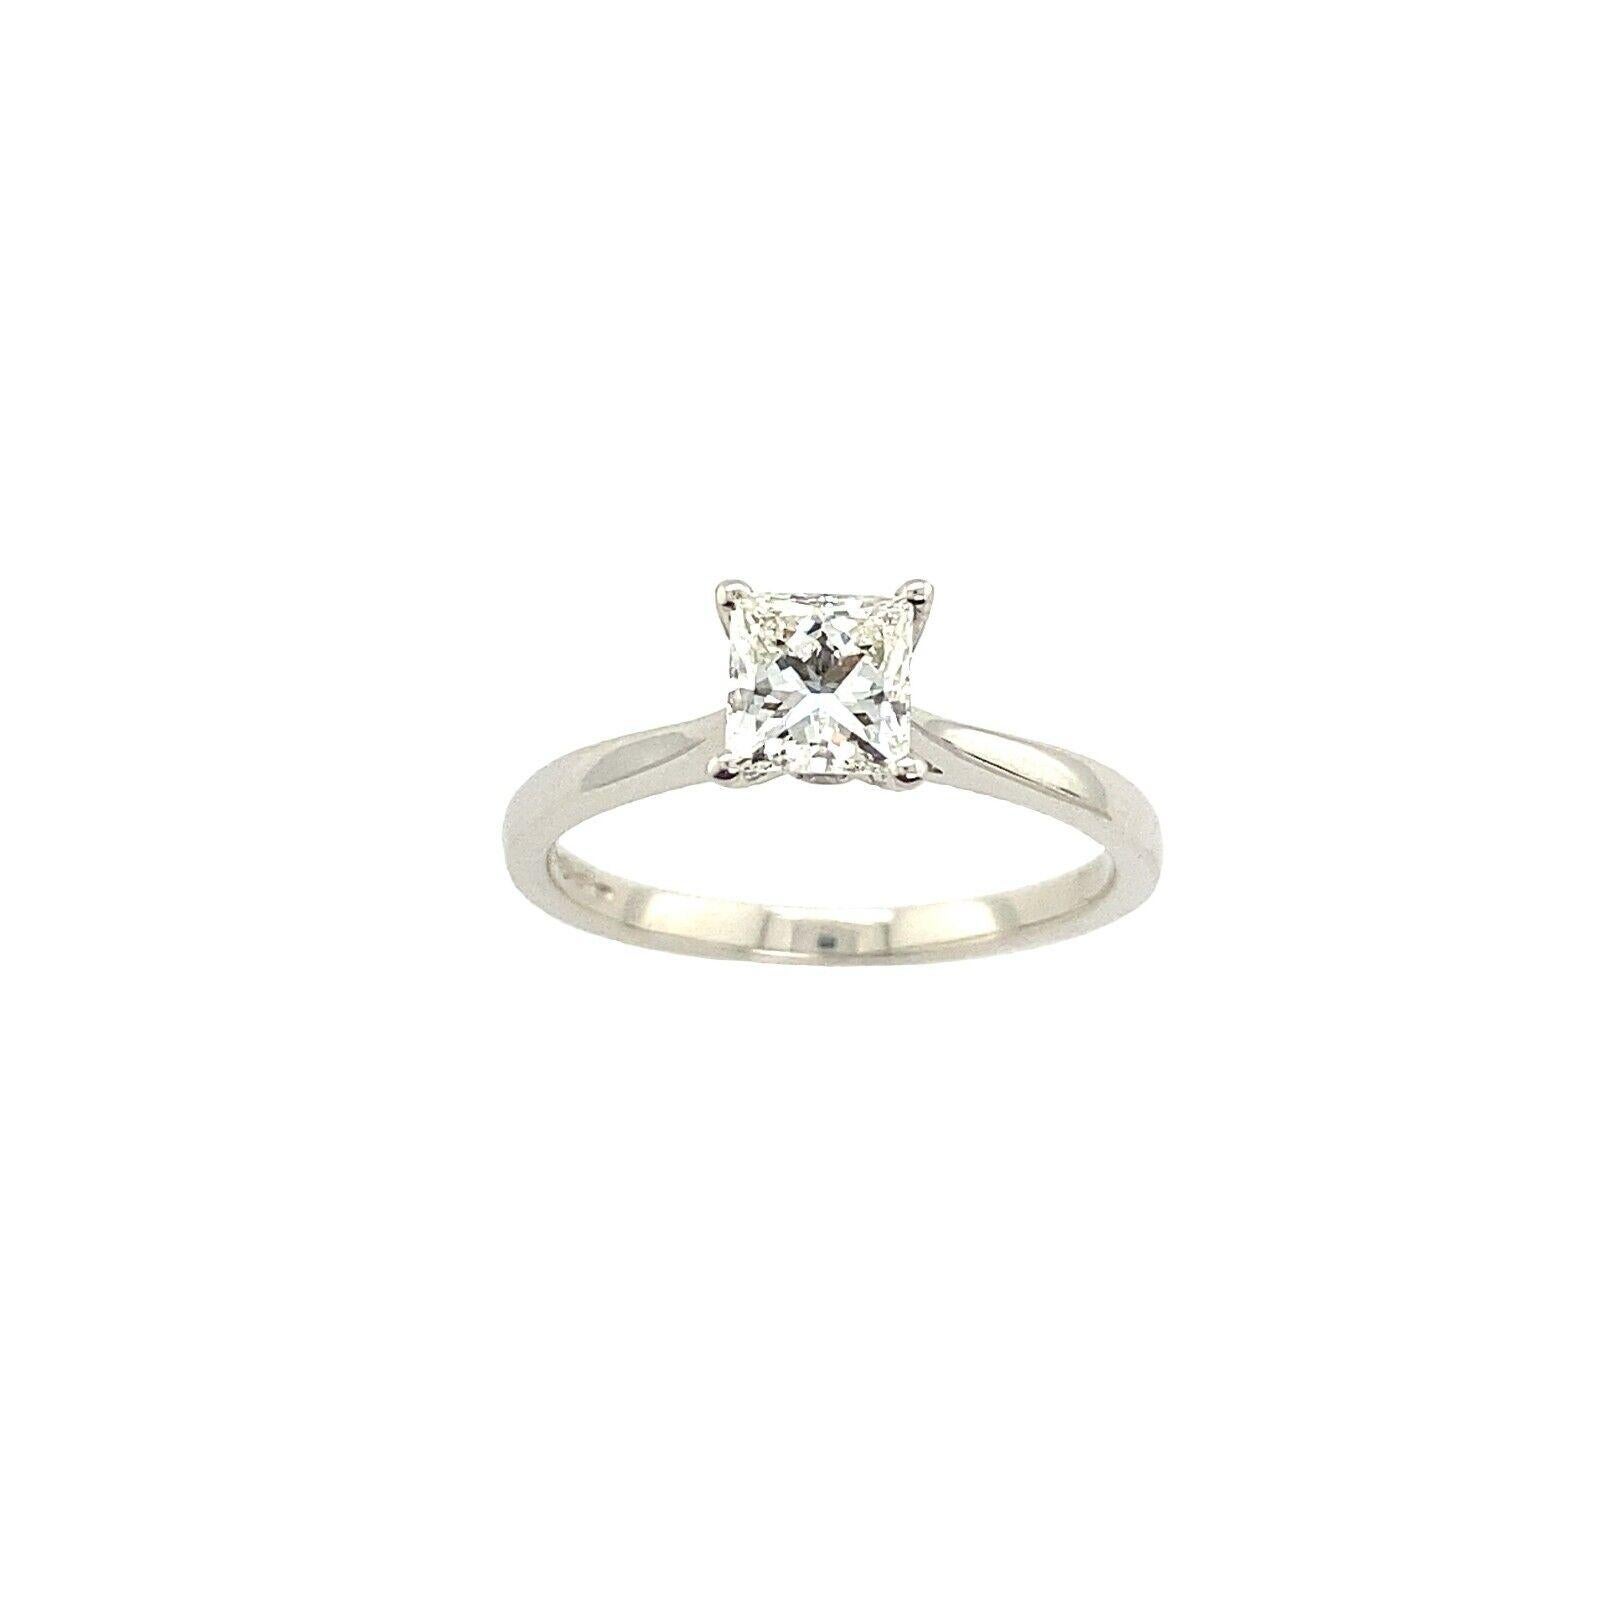 An elegant Diamond ring for your engagement, this Platinum ring features a 0.62ct Square Brilliant Cut Diamond. The VVS2 clarity, H colour diamond is set in a four-claw Platinum setting, with 2 small round Diamond on sides. The Diamond is certified